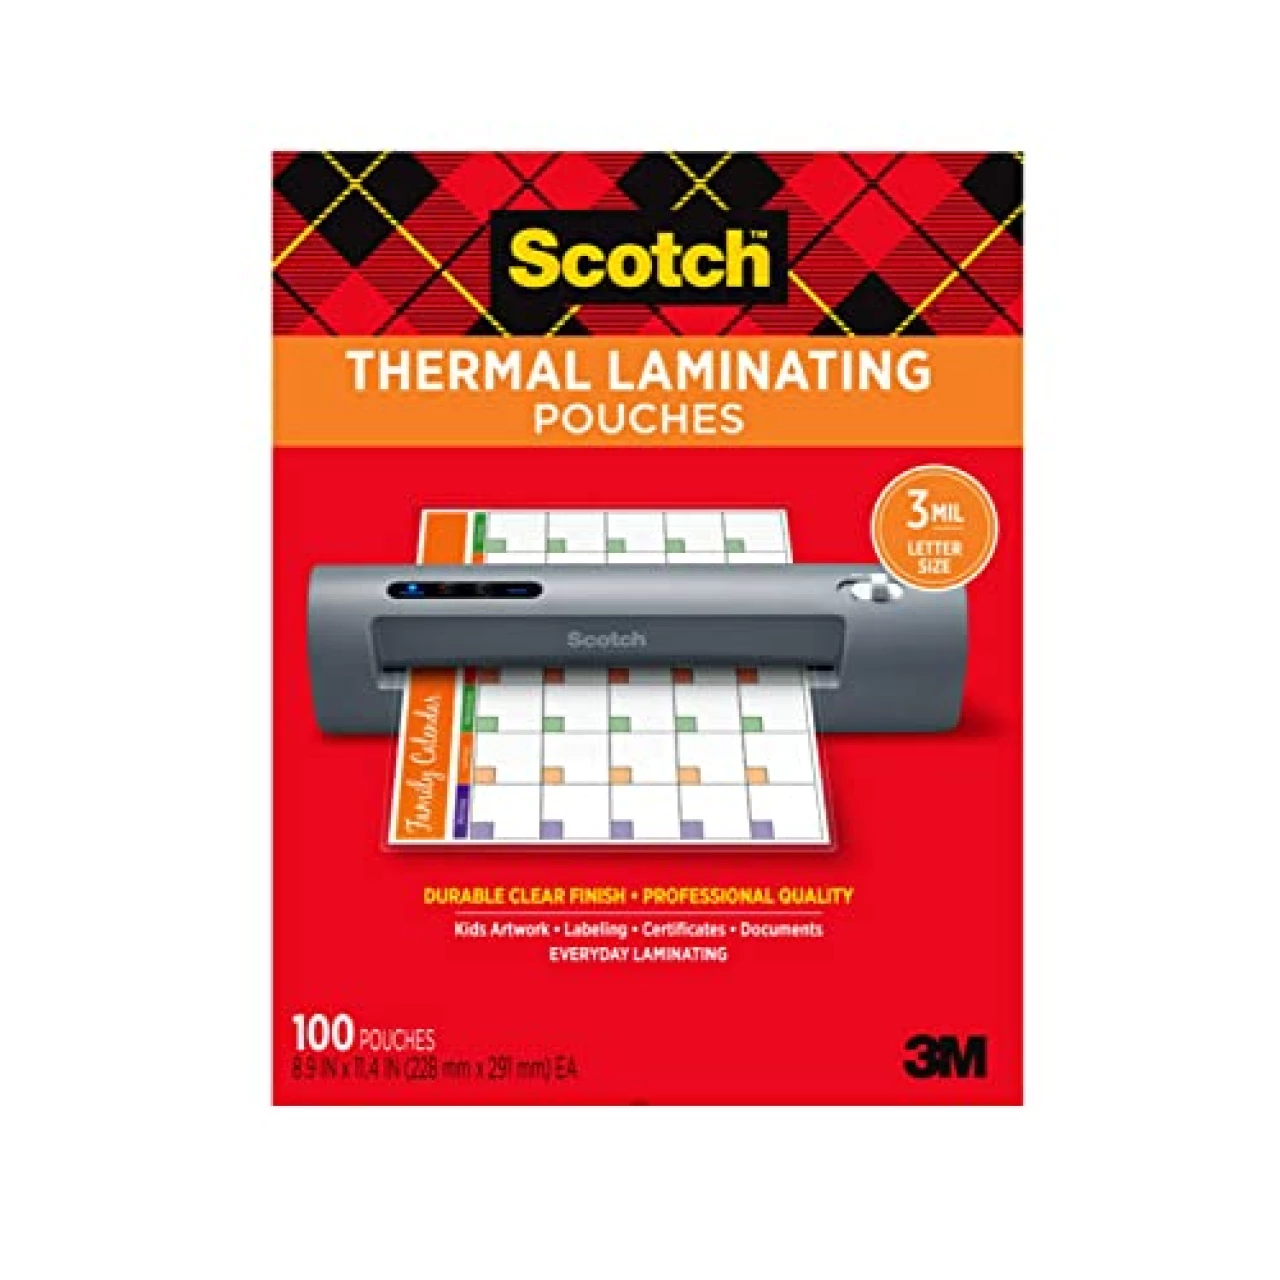 Scotch Thermal Laminating Pouches, 100 Pack Laminating Sheets, 3 Mil, 8.9 x 11.4 Inches, Education Supplies &amp; Craft Supplies, For Use With Thermal Laminators, Letter Size Sheets (TP3854-100)